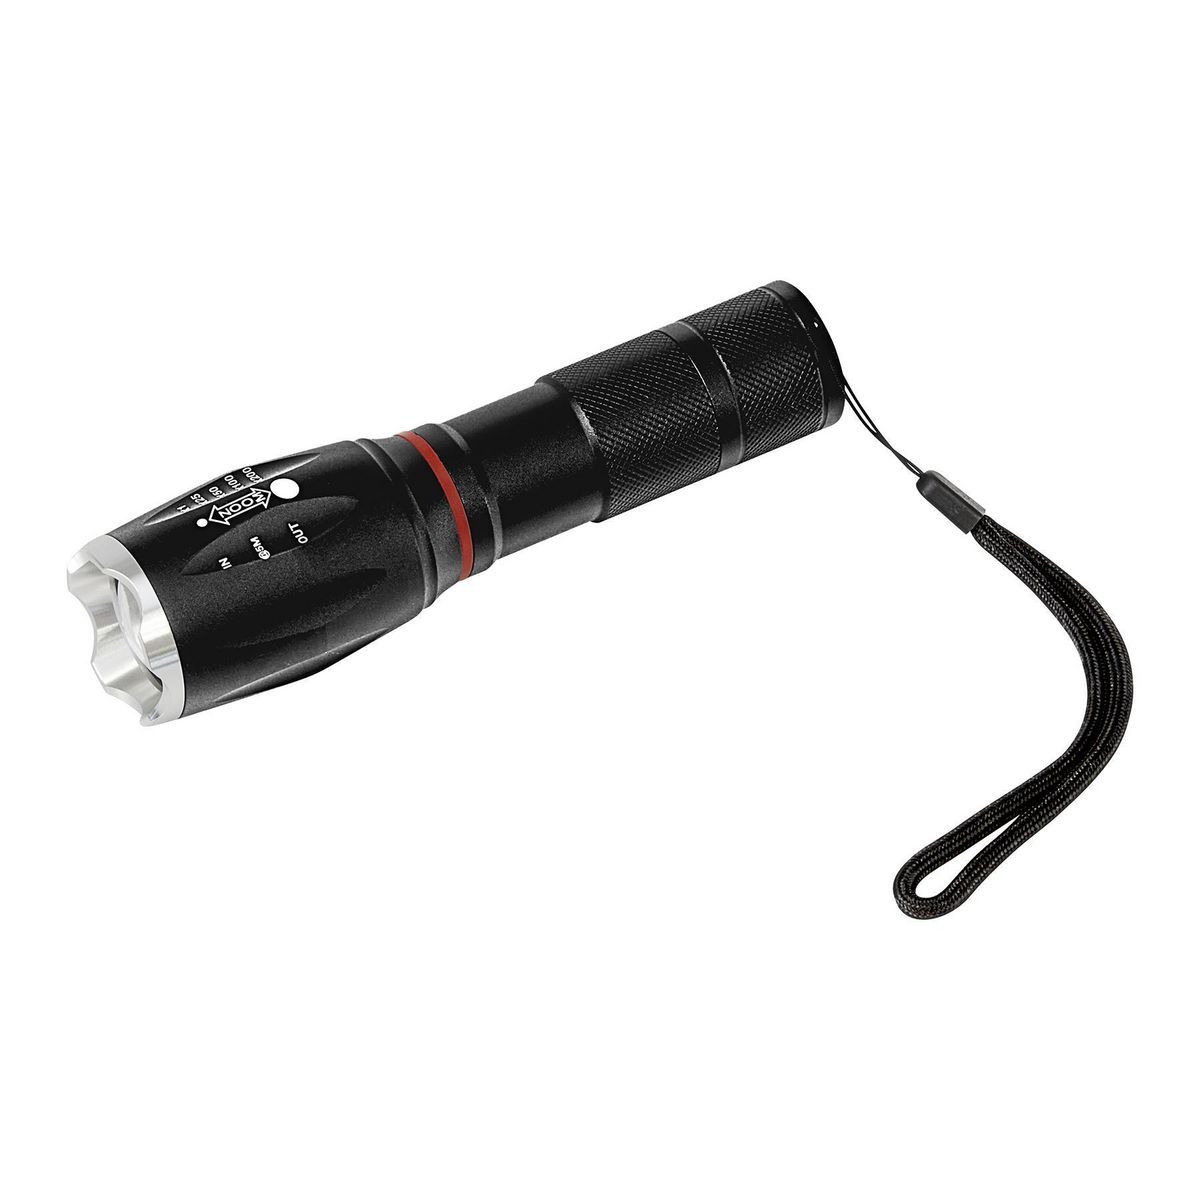 400 Lumen Tactical Flashlight/Magnetic Work Light with 10 Hour Runtime